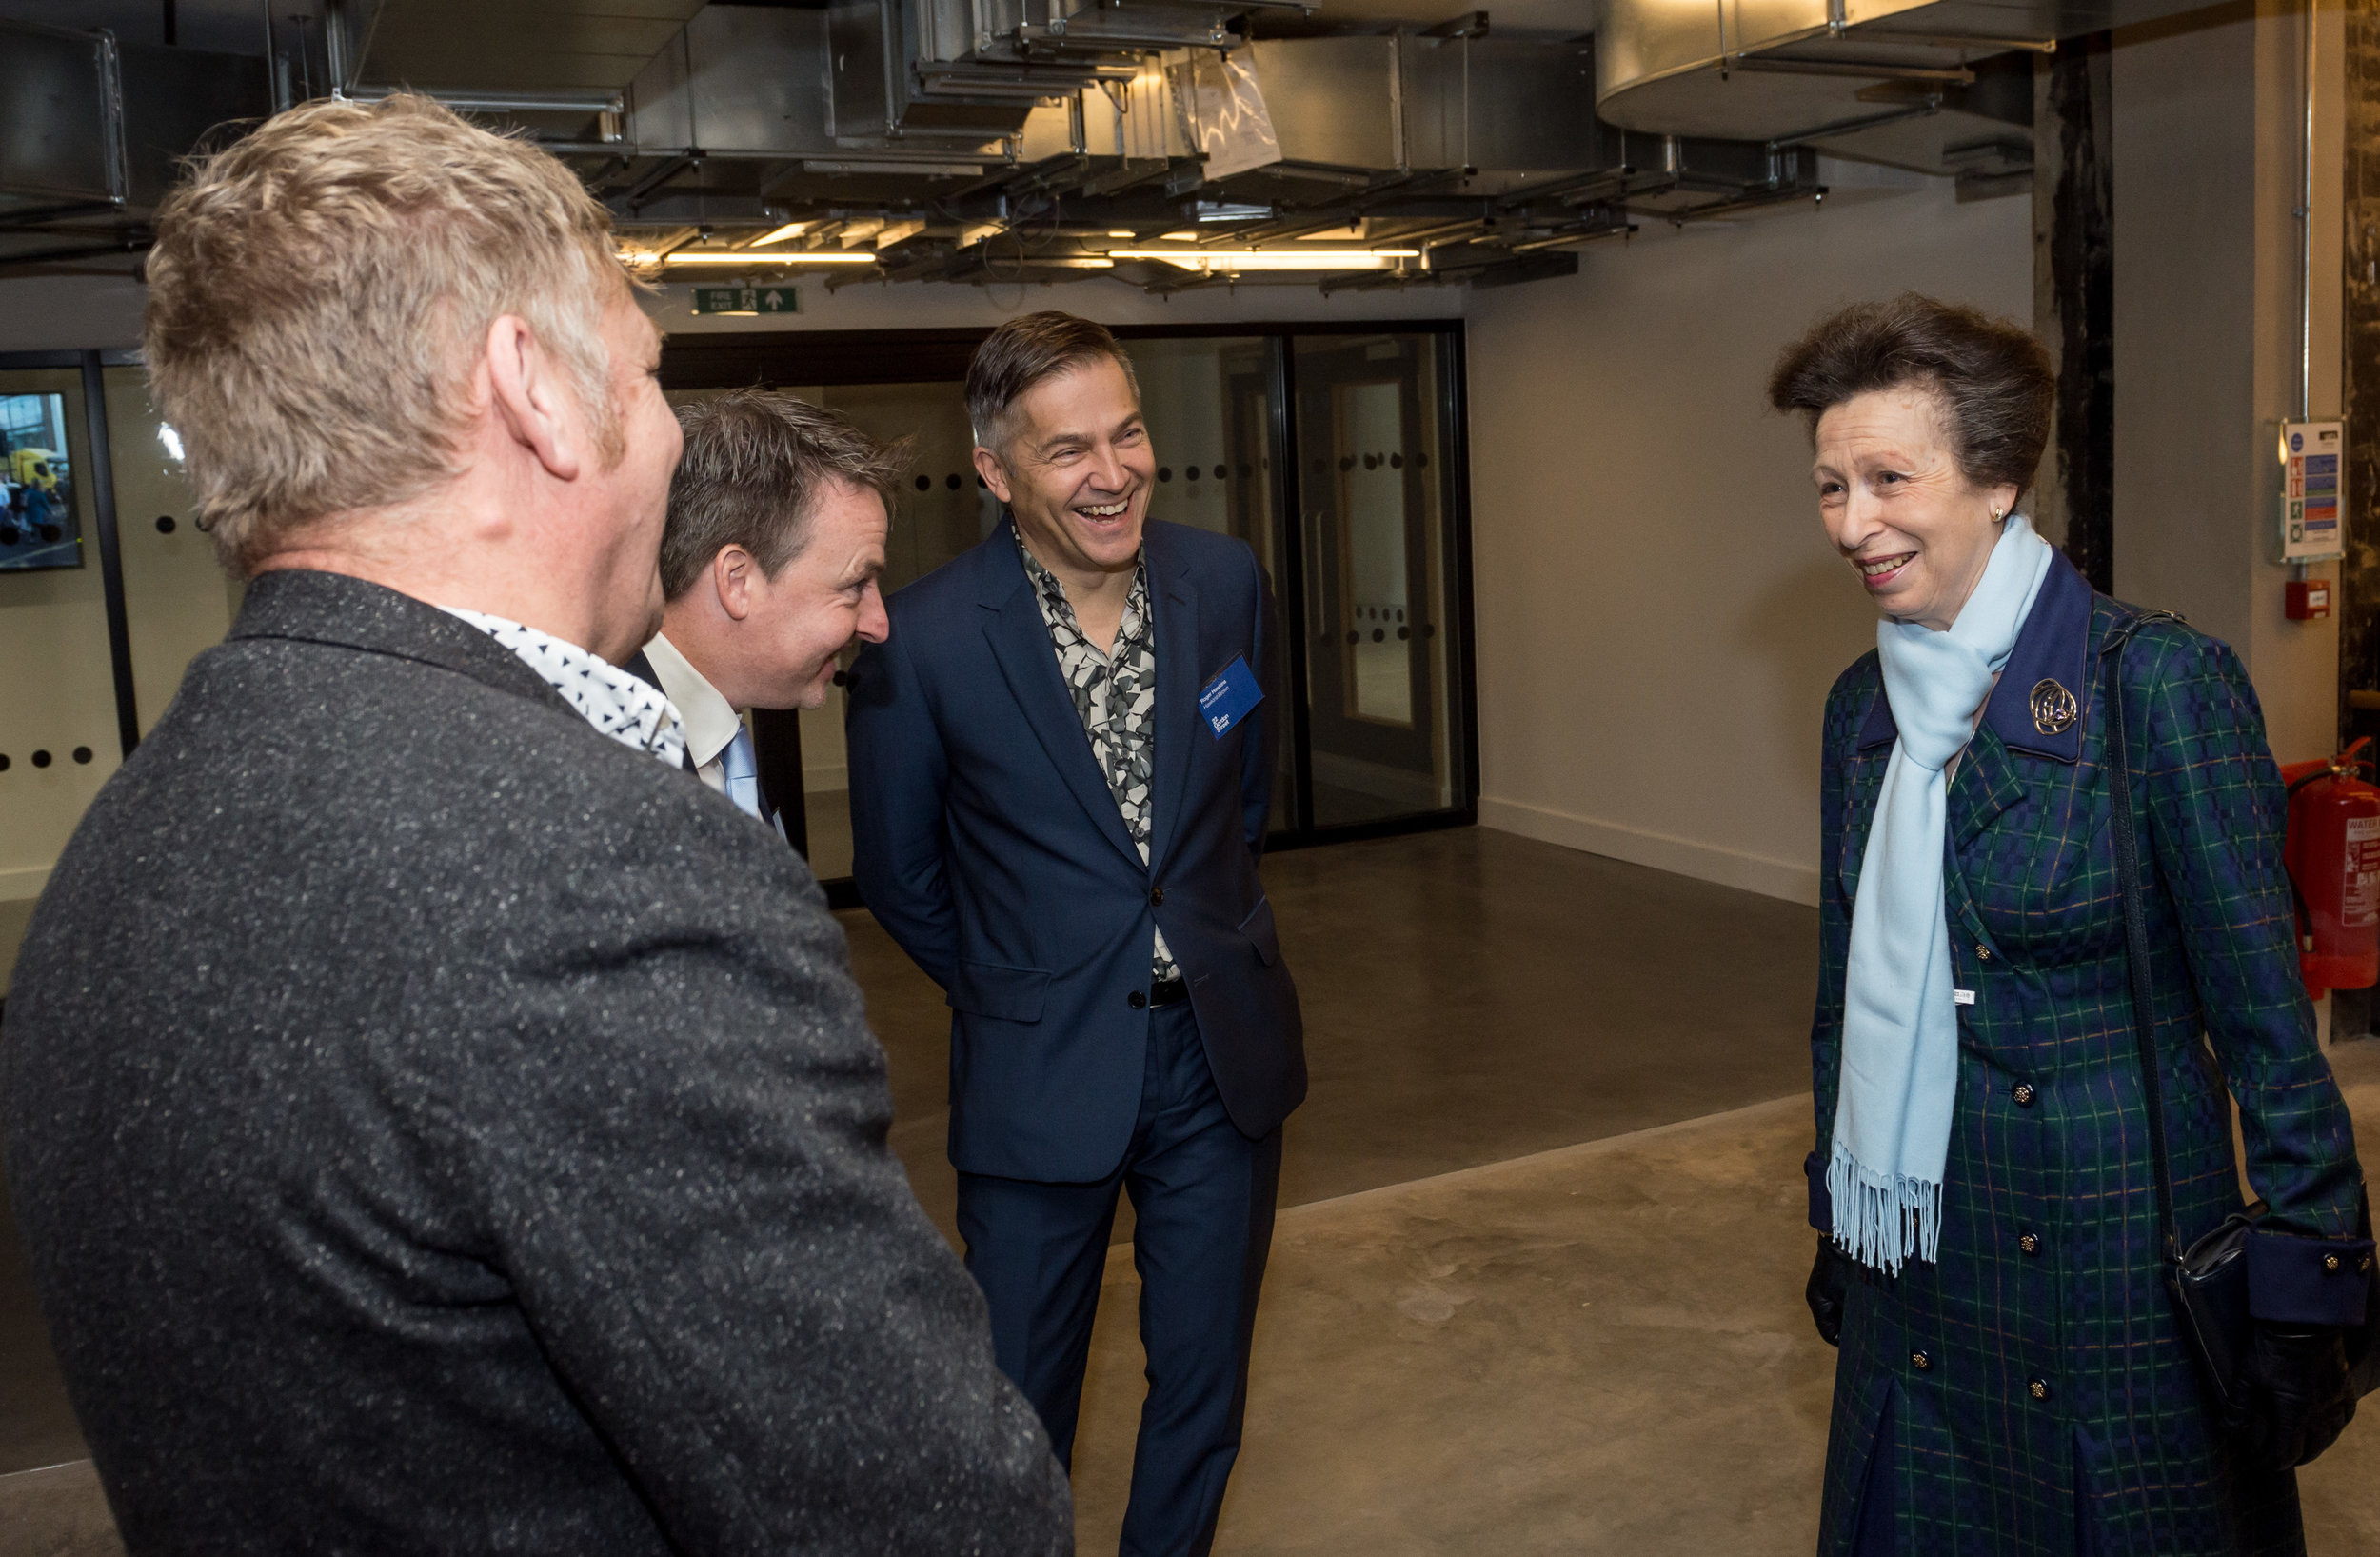  HRH Princess Anne chats with Roger Hawkins, Russell Brown Directors of the Project Architecture team Hawkins/Brown while touring the building before officially opening the refurbished  Bartlett School of Architecture, 22 Gordon Street. London 16/12/